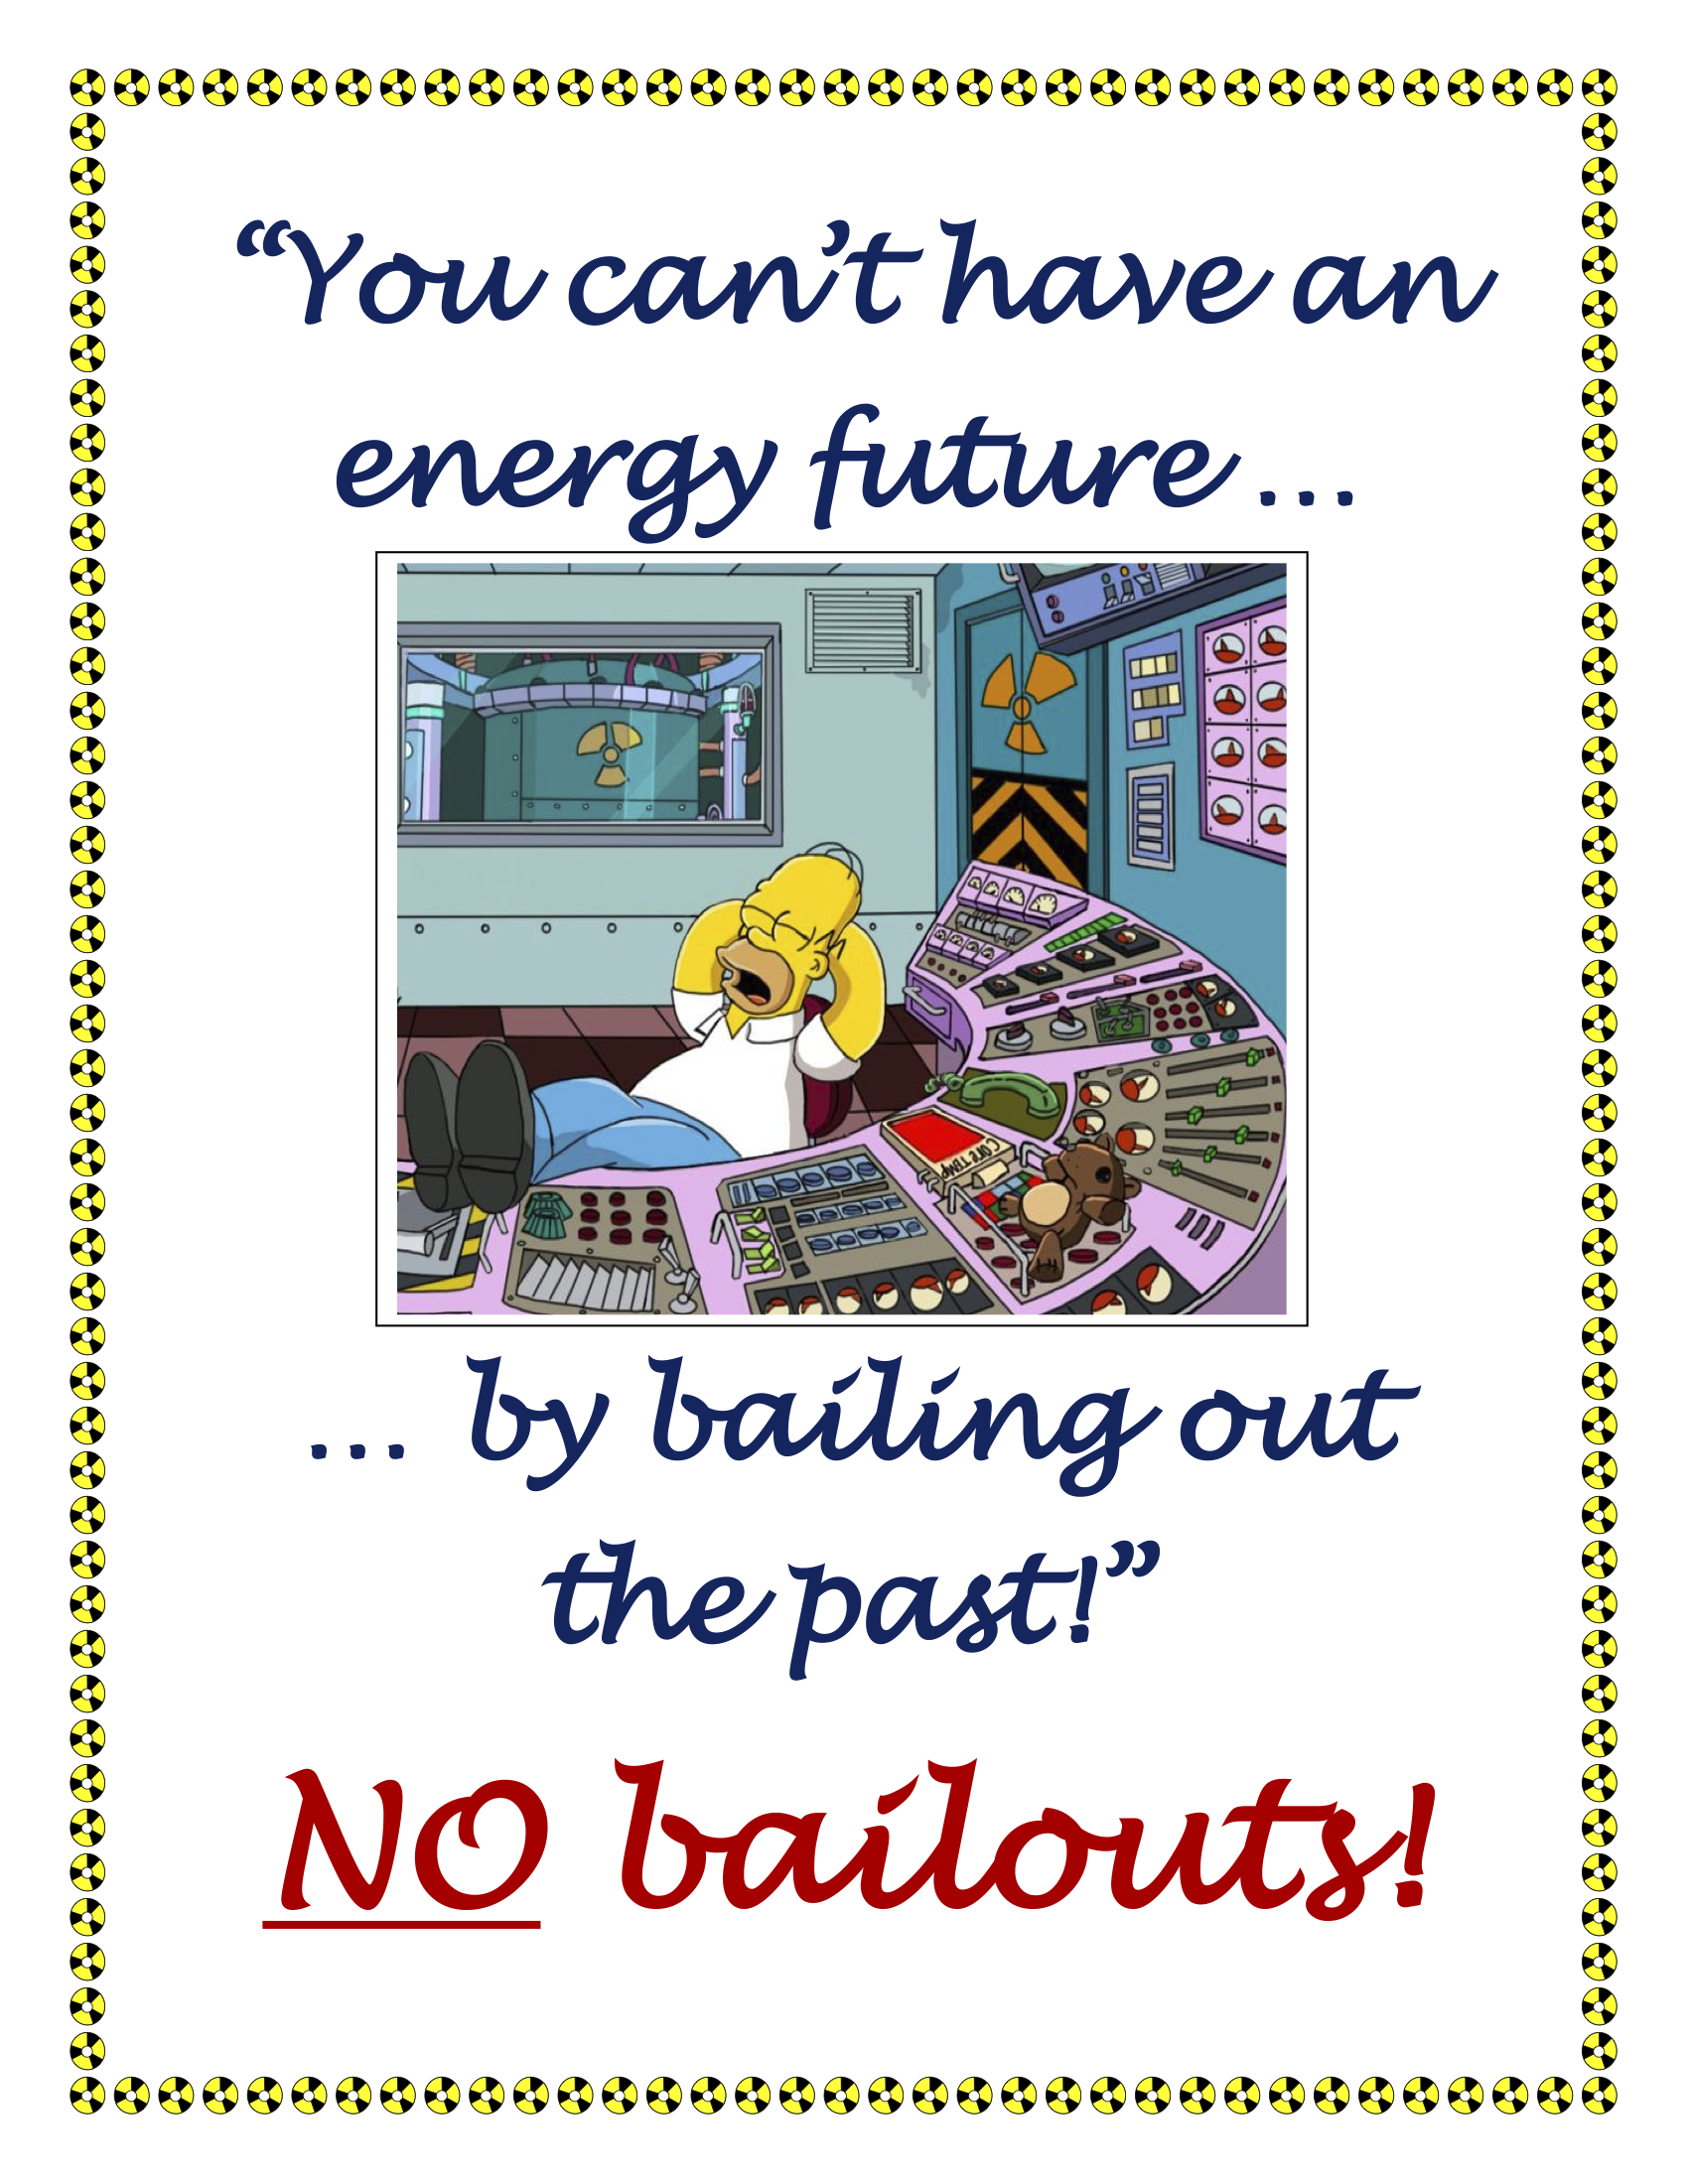 No Nuclear Bailouts